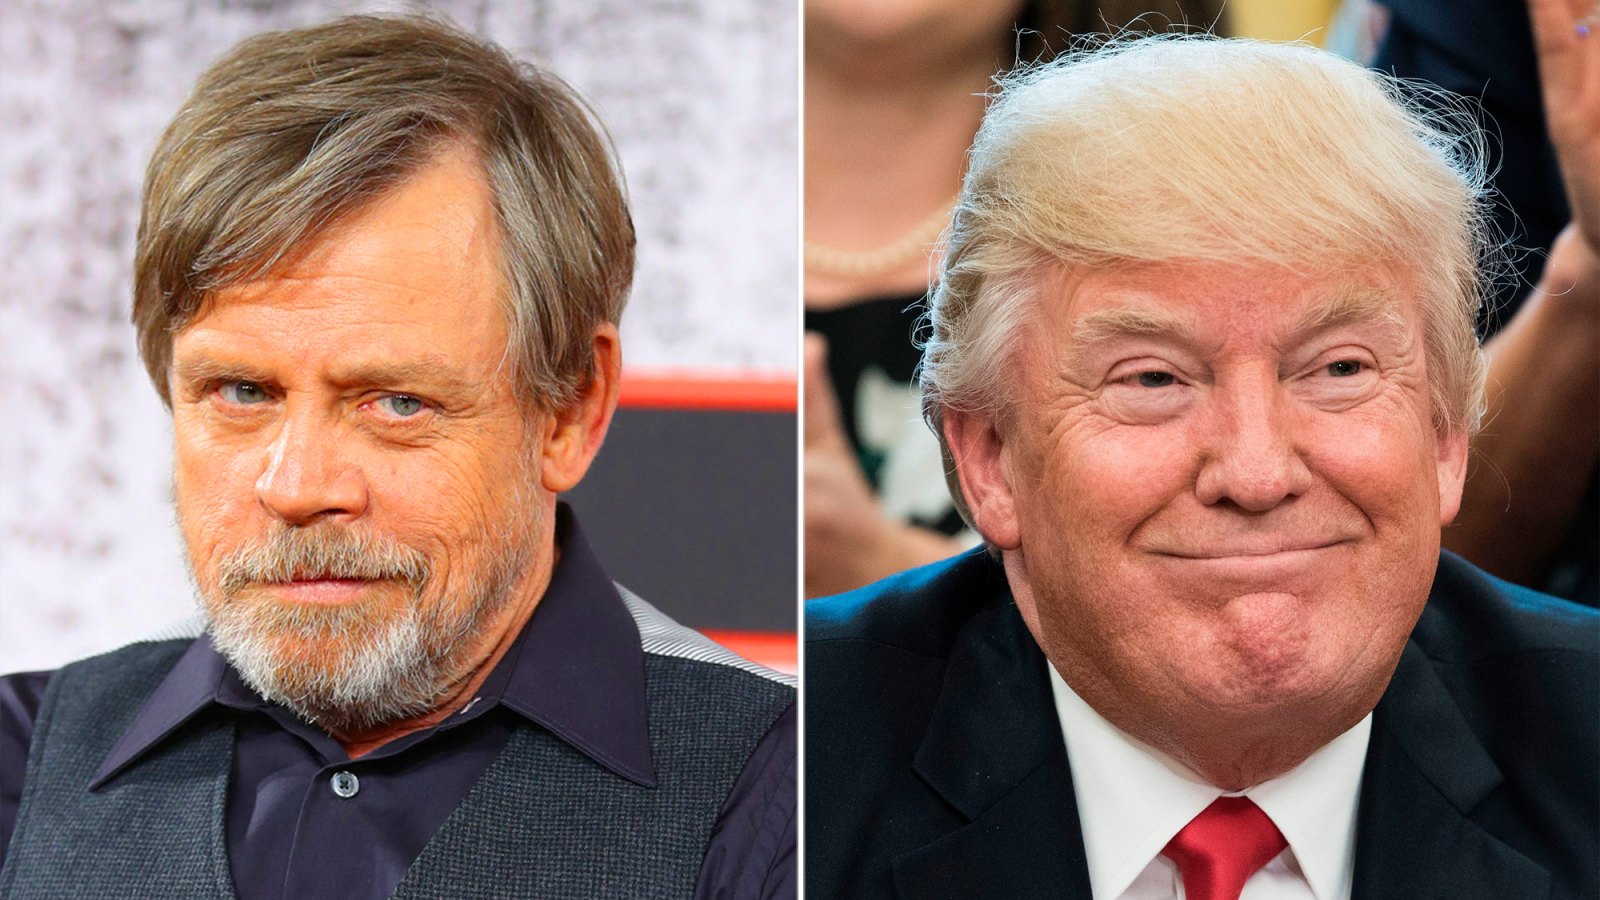 Mark Hamill Strikes Back at Trump’s Space Force Idea With Star Wars-Inspired Tweet